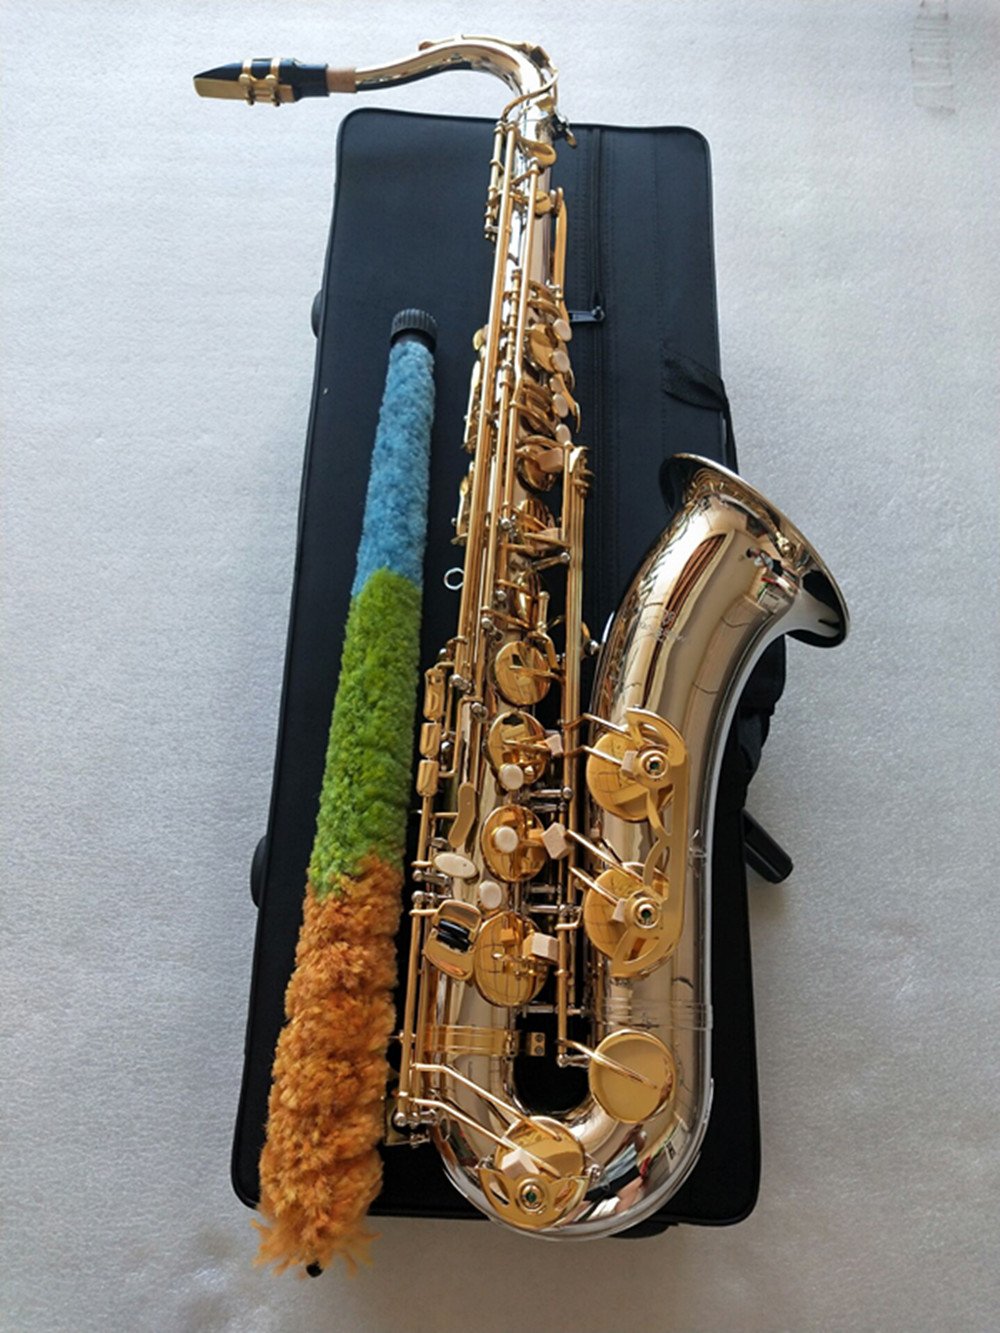 Top JapanT-W037 Saxophone High Quality Tenor Saxophone Instruments Nickel Plated Brass Professional level